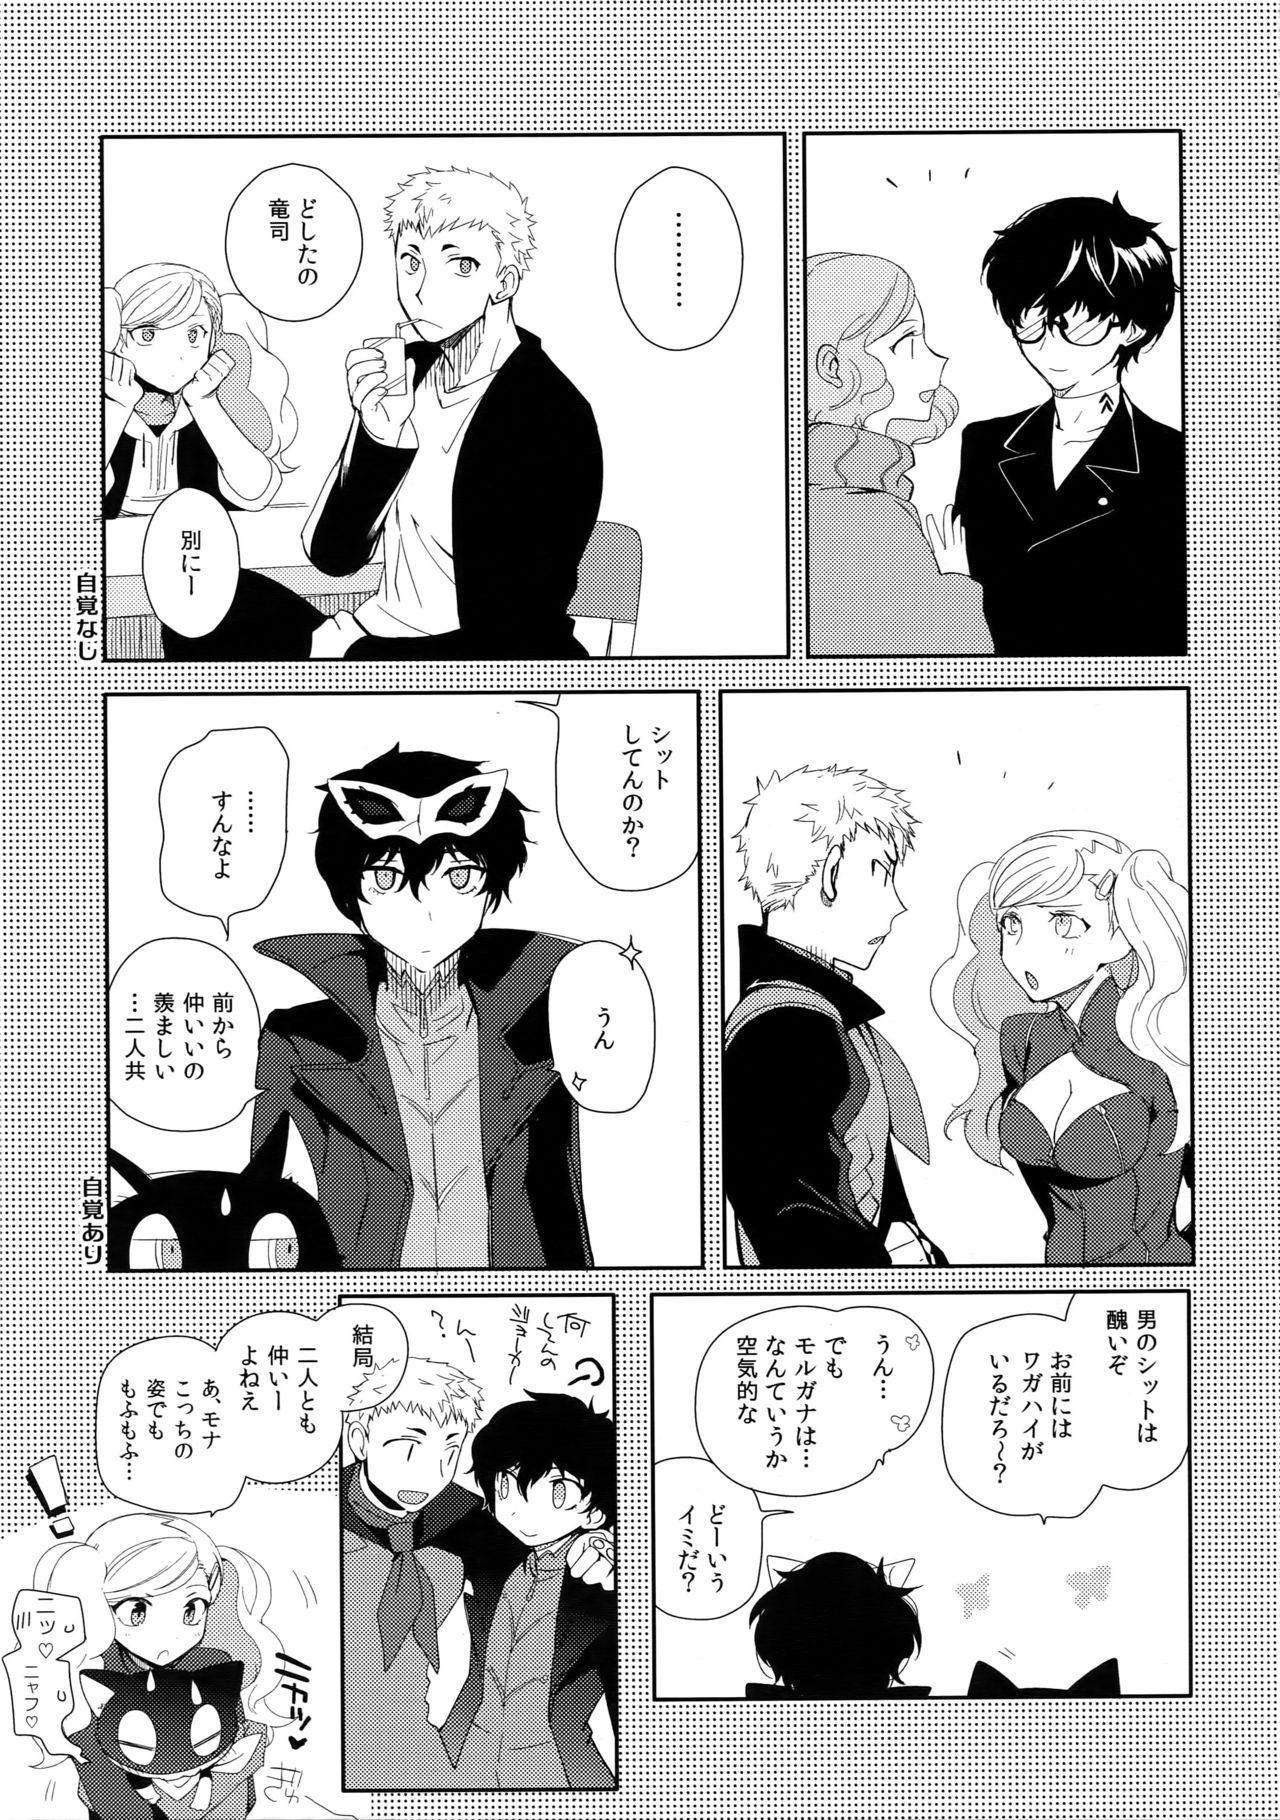 Czech You're My Hero - Persona 5 Indonesian - Page 12